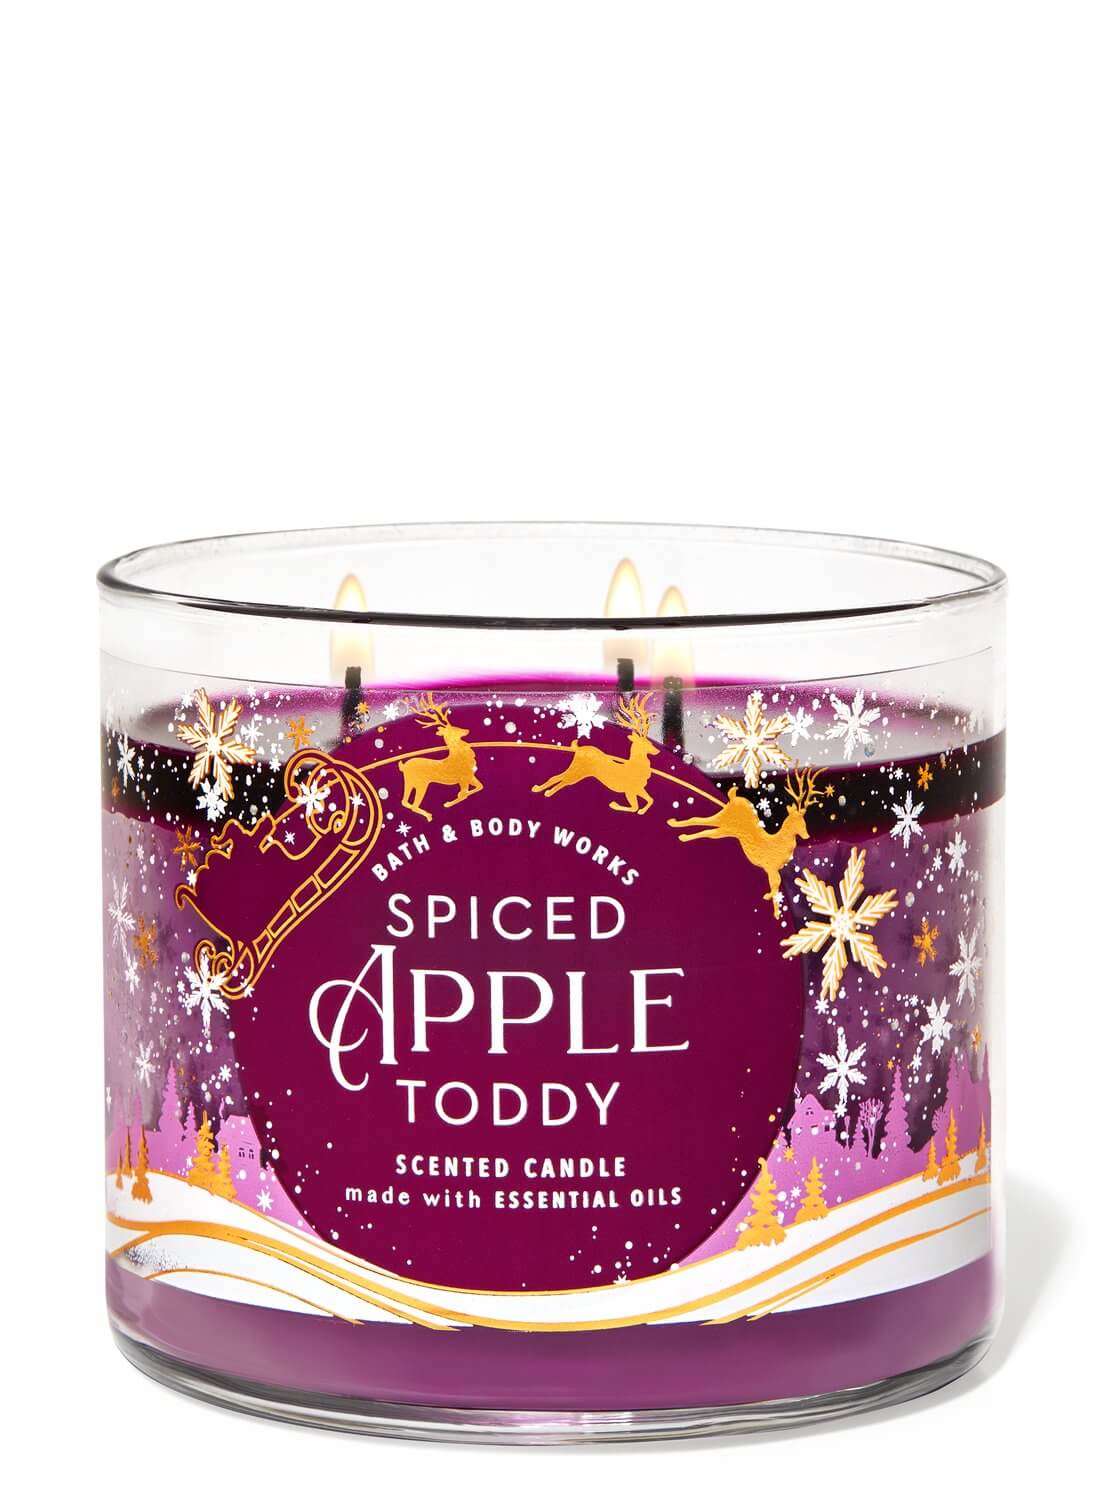 Bath & Body works Spiced Apple Toddy 3-Wick Candle